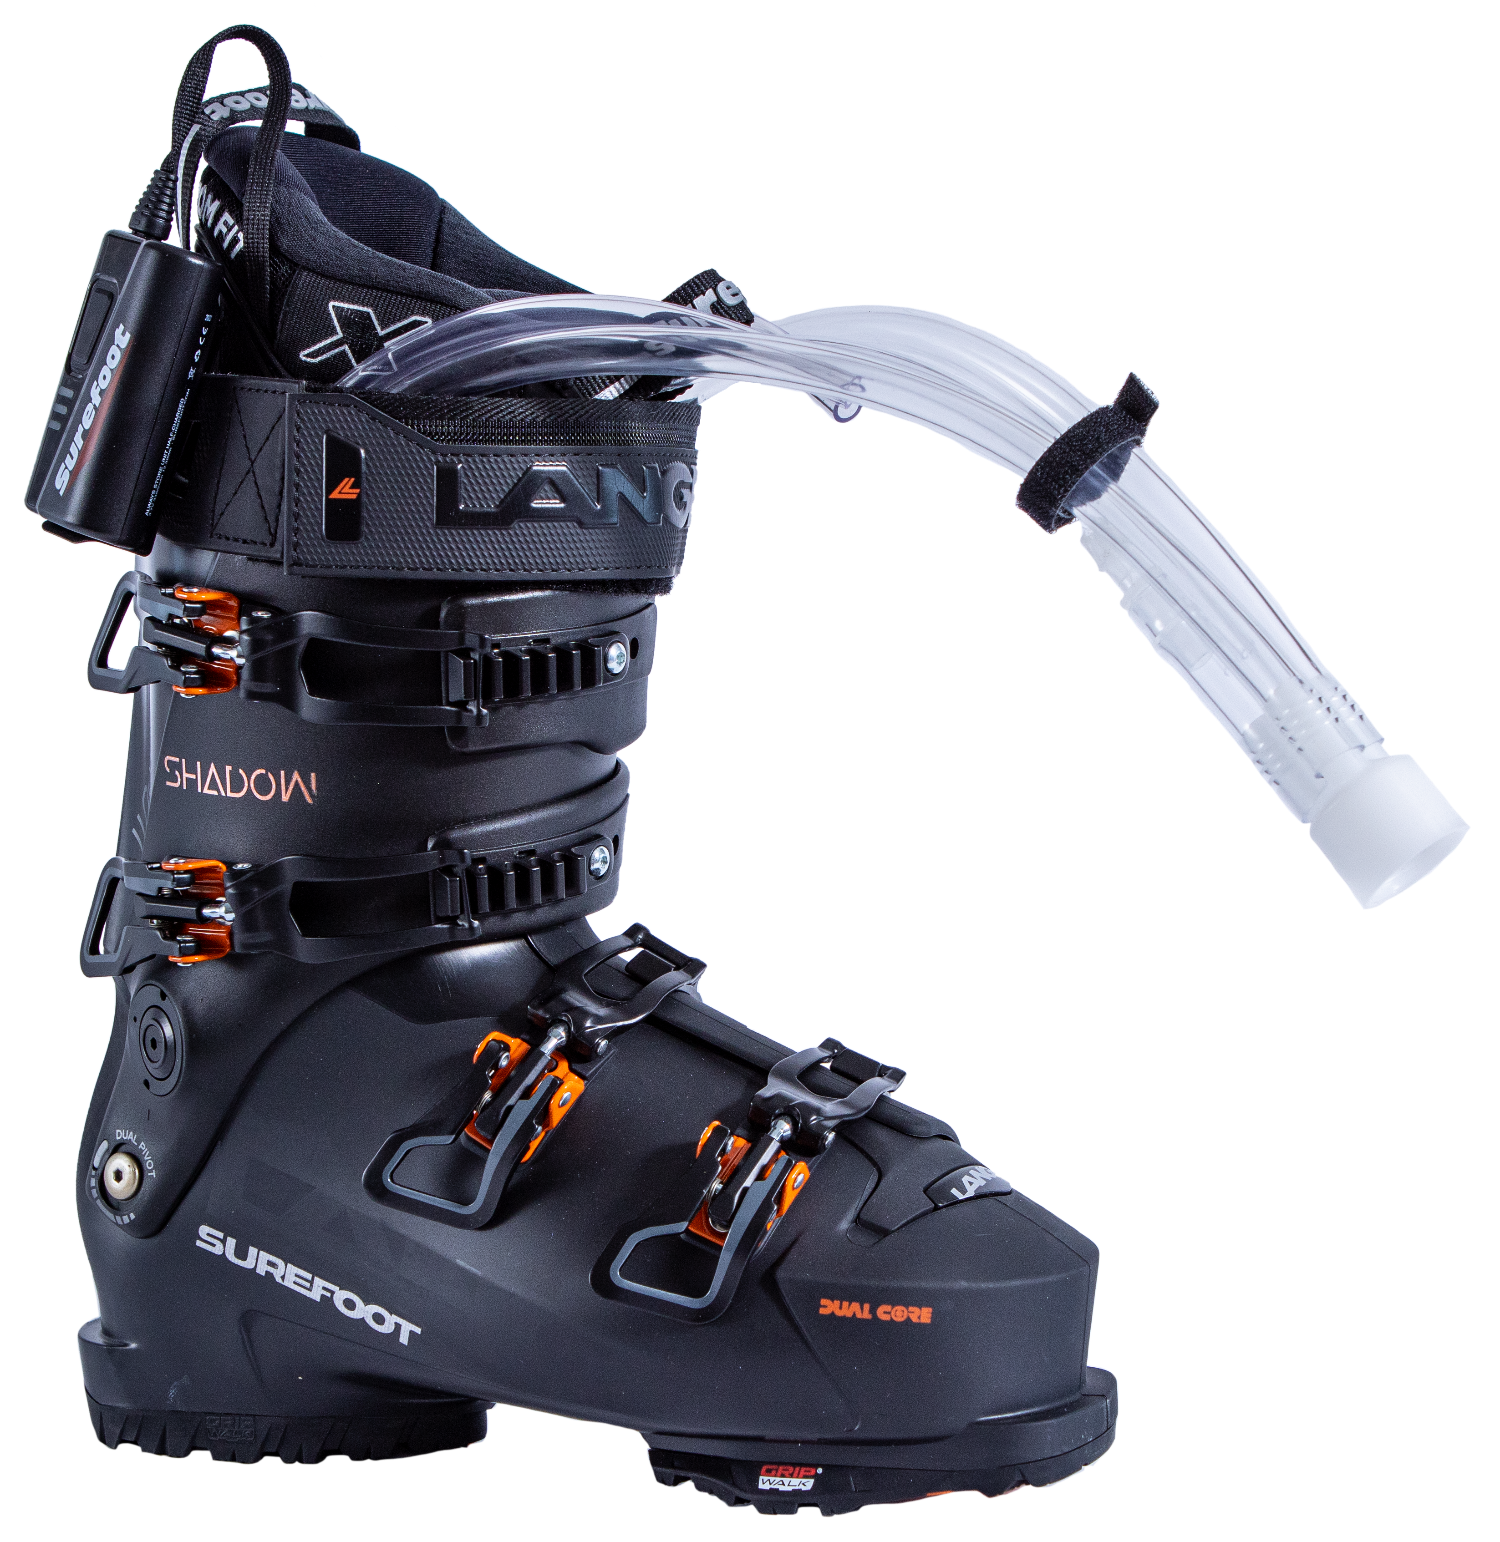 Surefoot Lange Shadow 110 LV matte black ski boot shell with orange accents on buckles and Lange logo in black on power strap, Surefoot logo in white. Plastic tubes coming out for Surefoot memory foam injection into shell lining. Winterheat ski boot heater attached to outside edge.